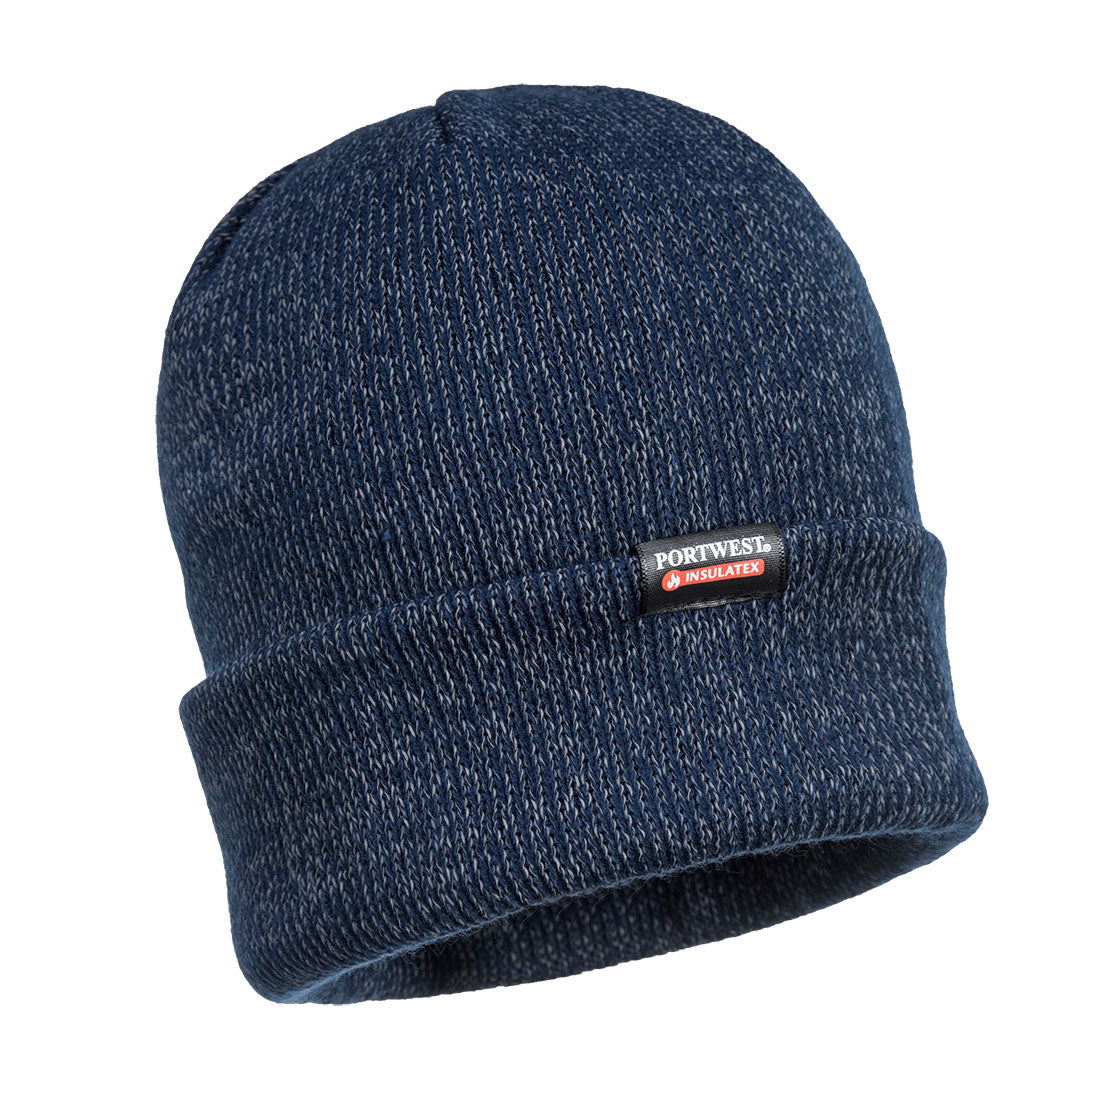 B026 - Reflective Knit Cap Insulatex Lined